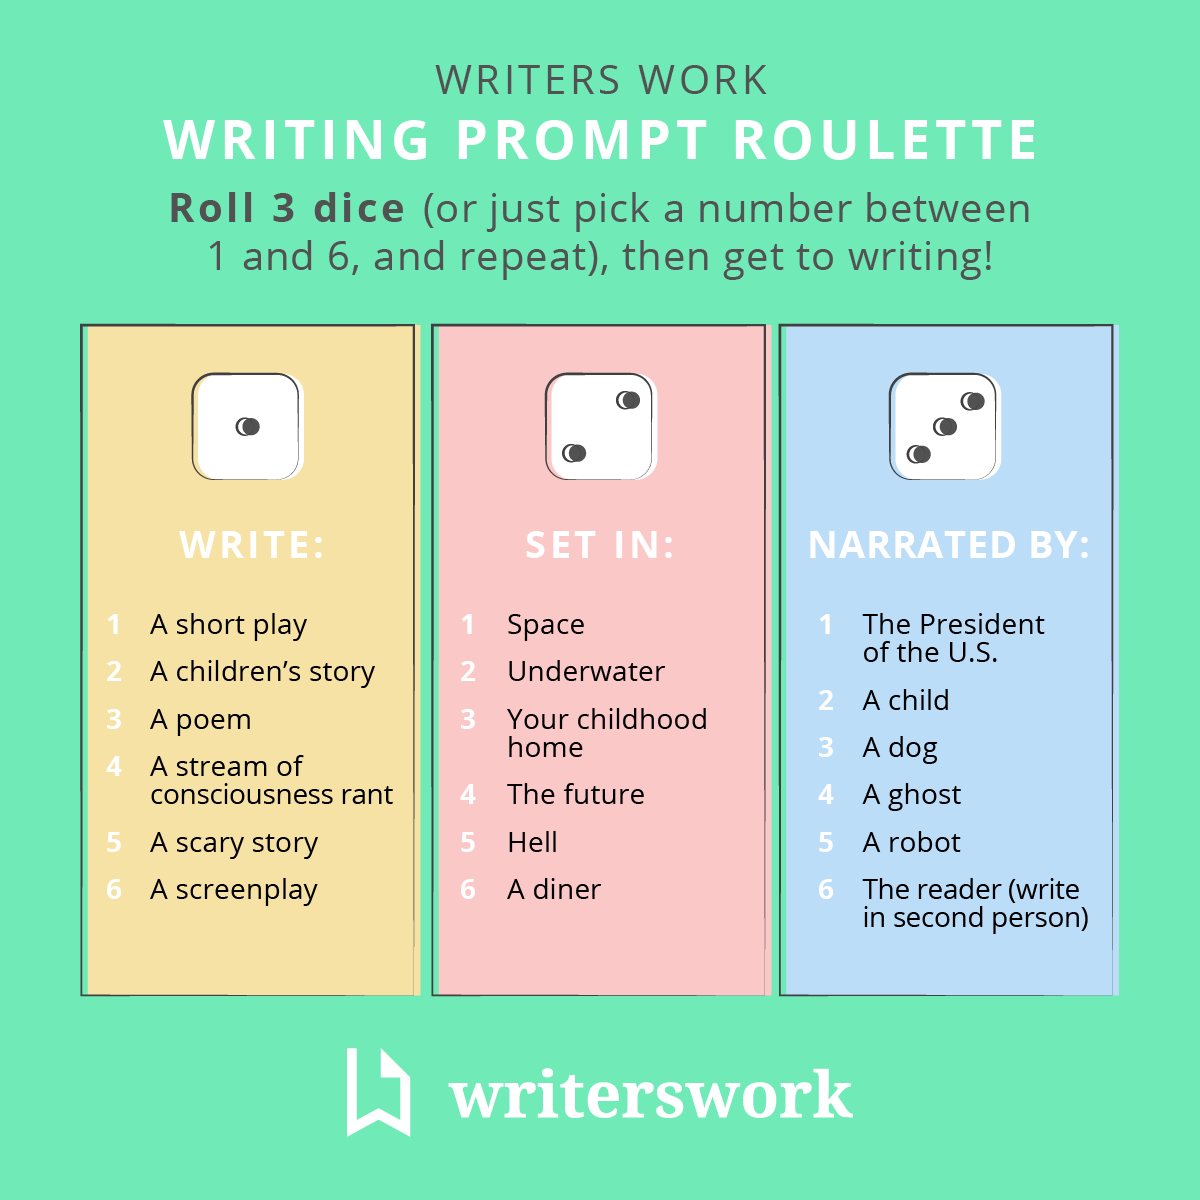 Infographic showing how to play "writing prompt roulette."